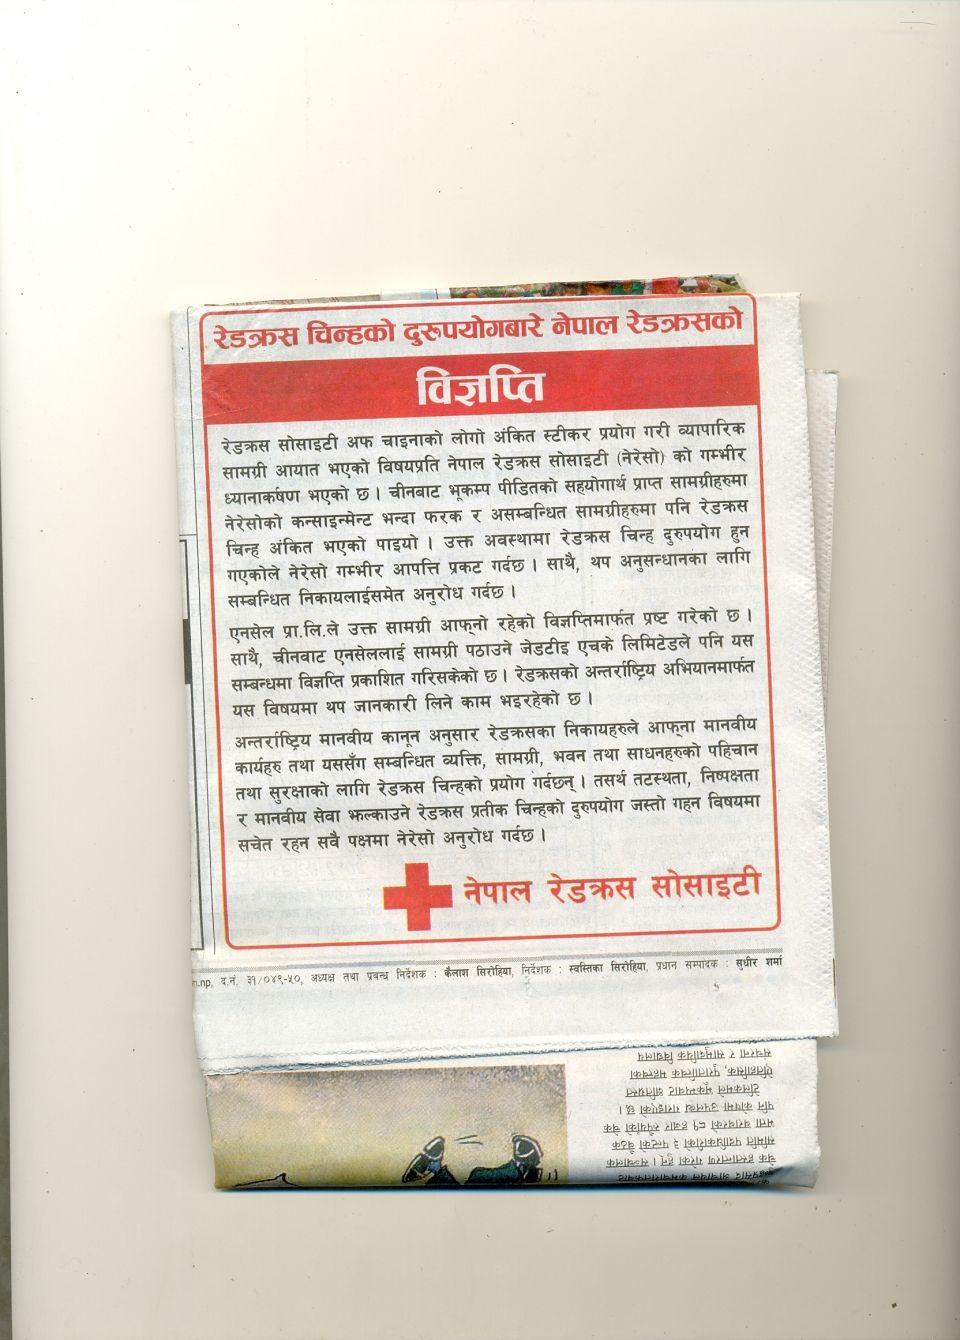 Nepal Red Cross Logo - Red Cross expresses concern over the misuse of the Red Cross emblem